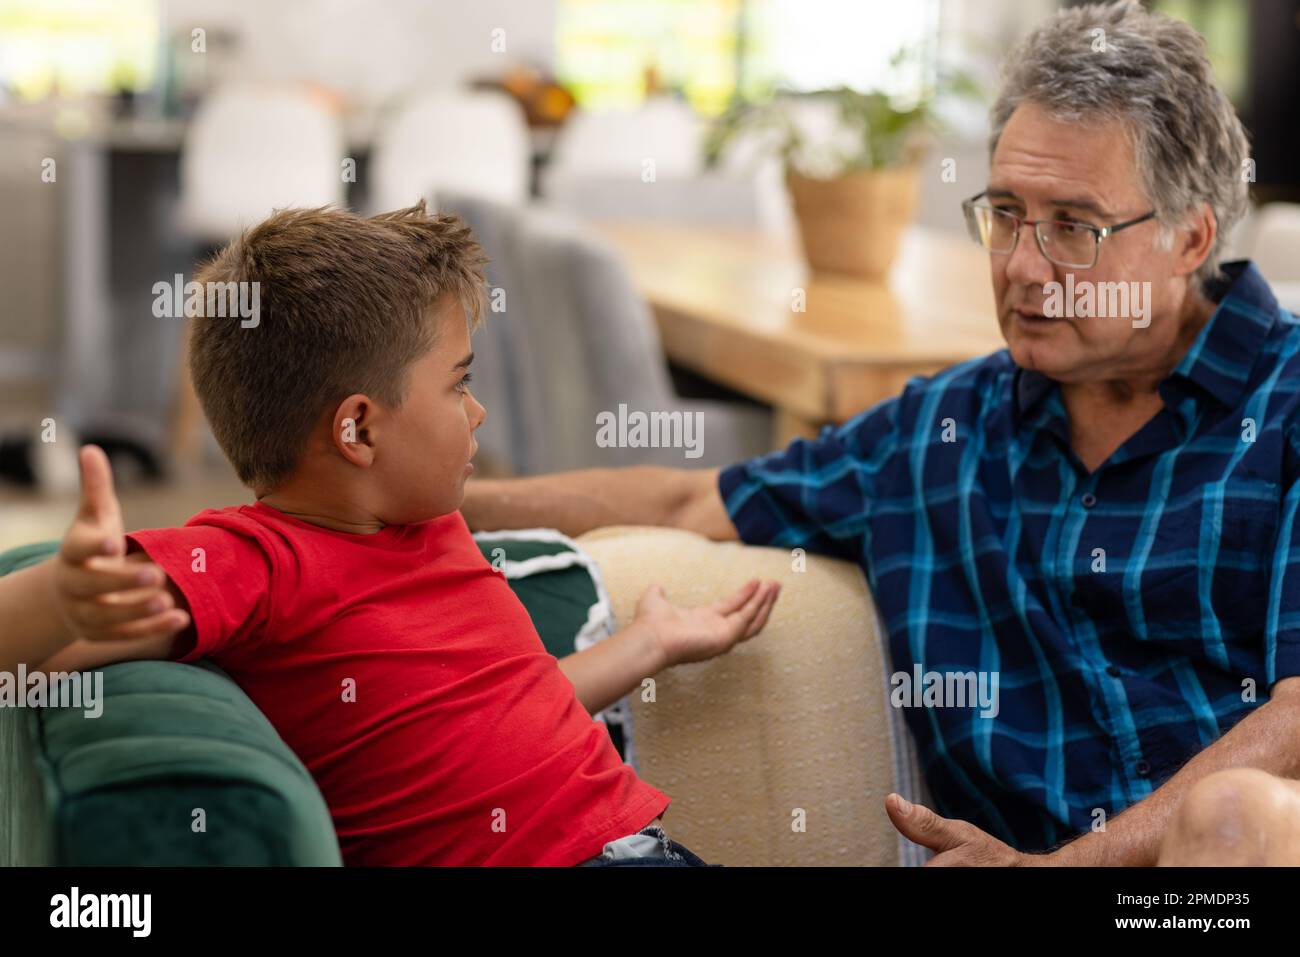 Caucasian angry boy shrugging shoulders while talking with grandfather on sofa in living room Stock Photo